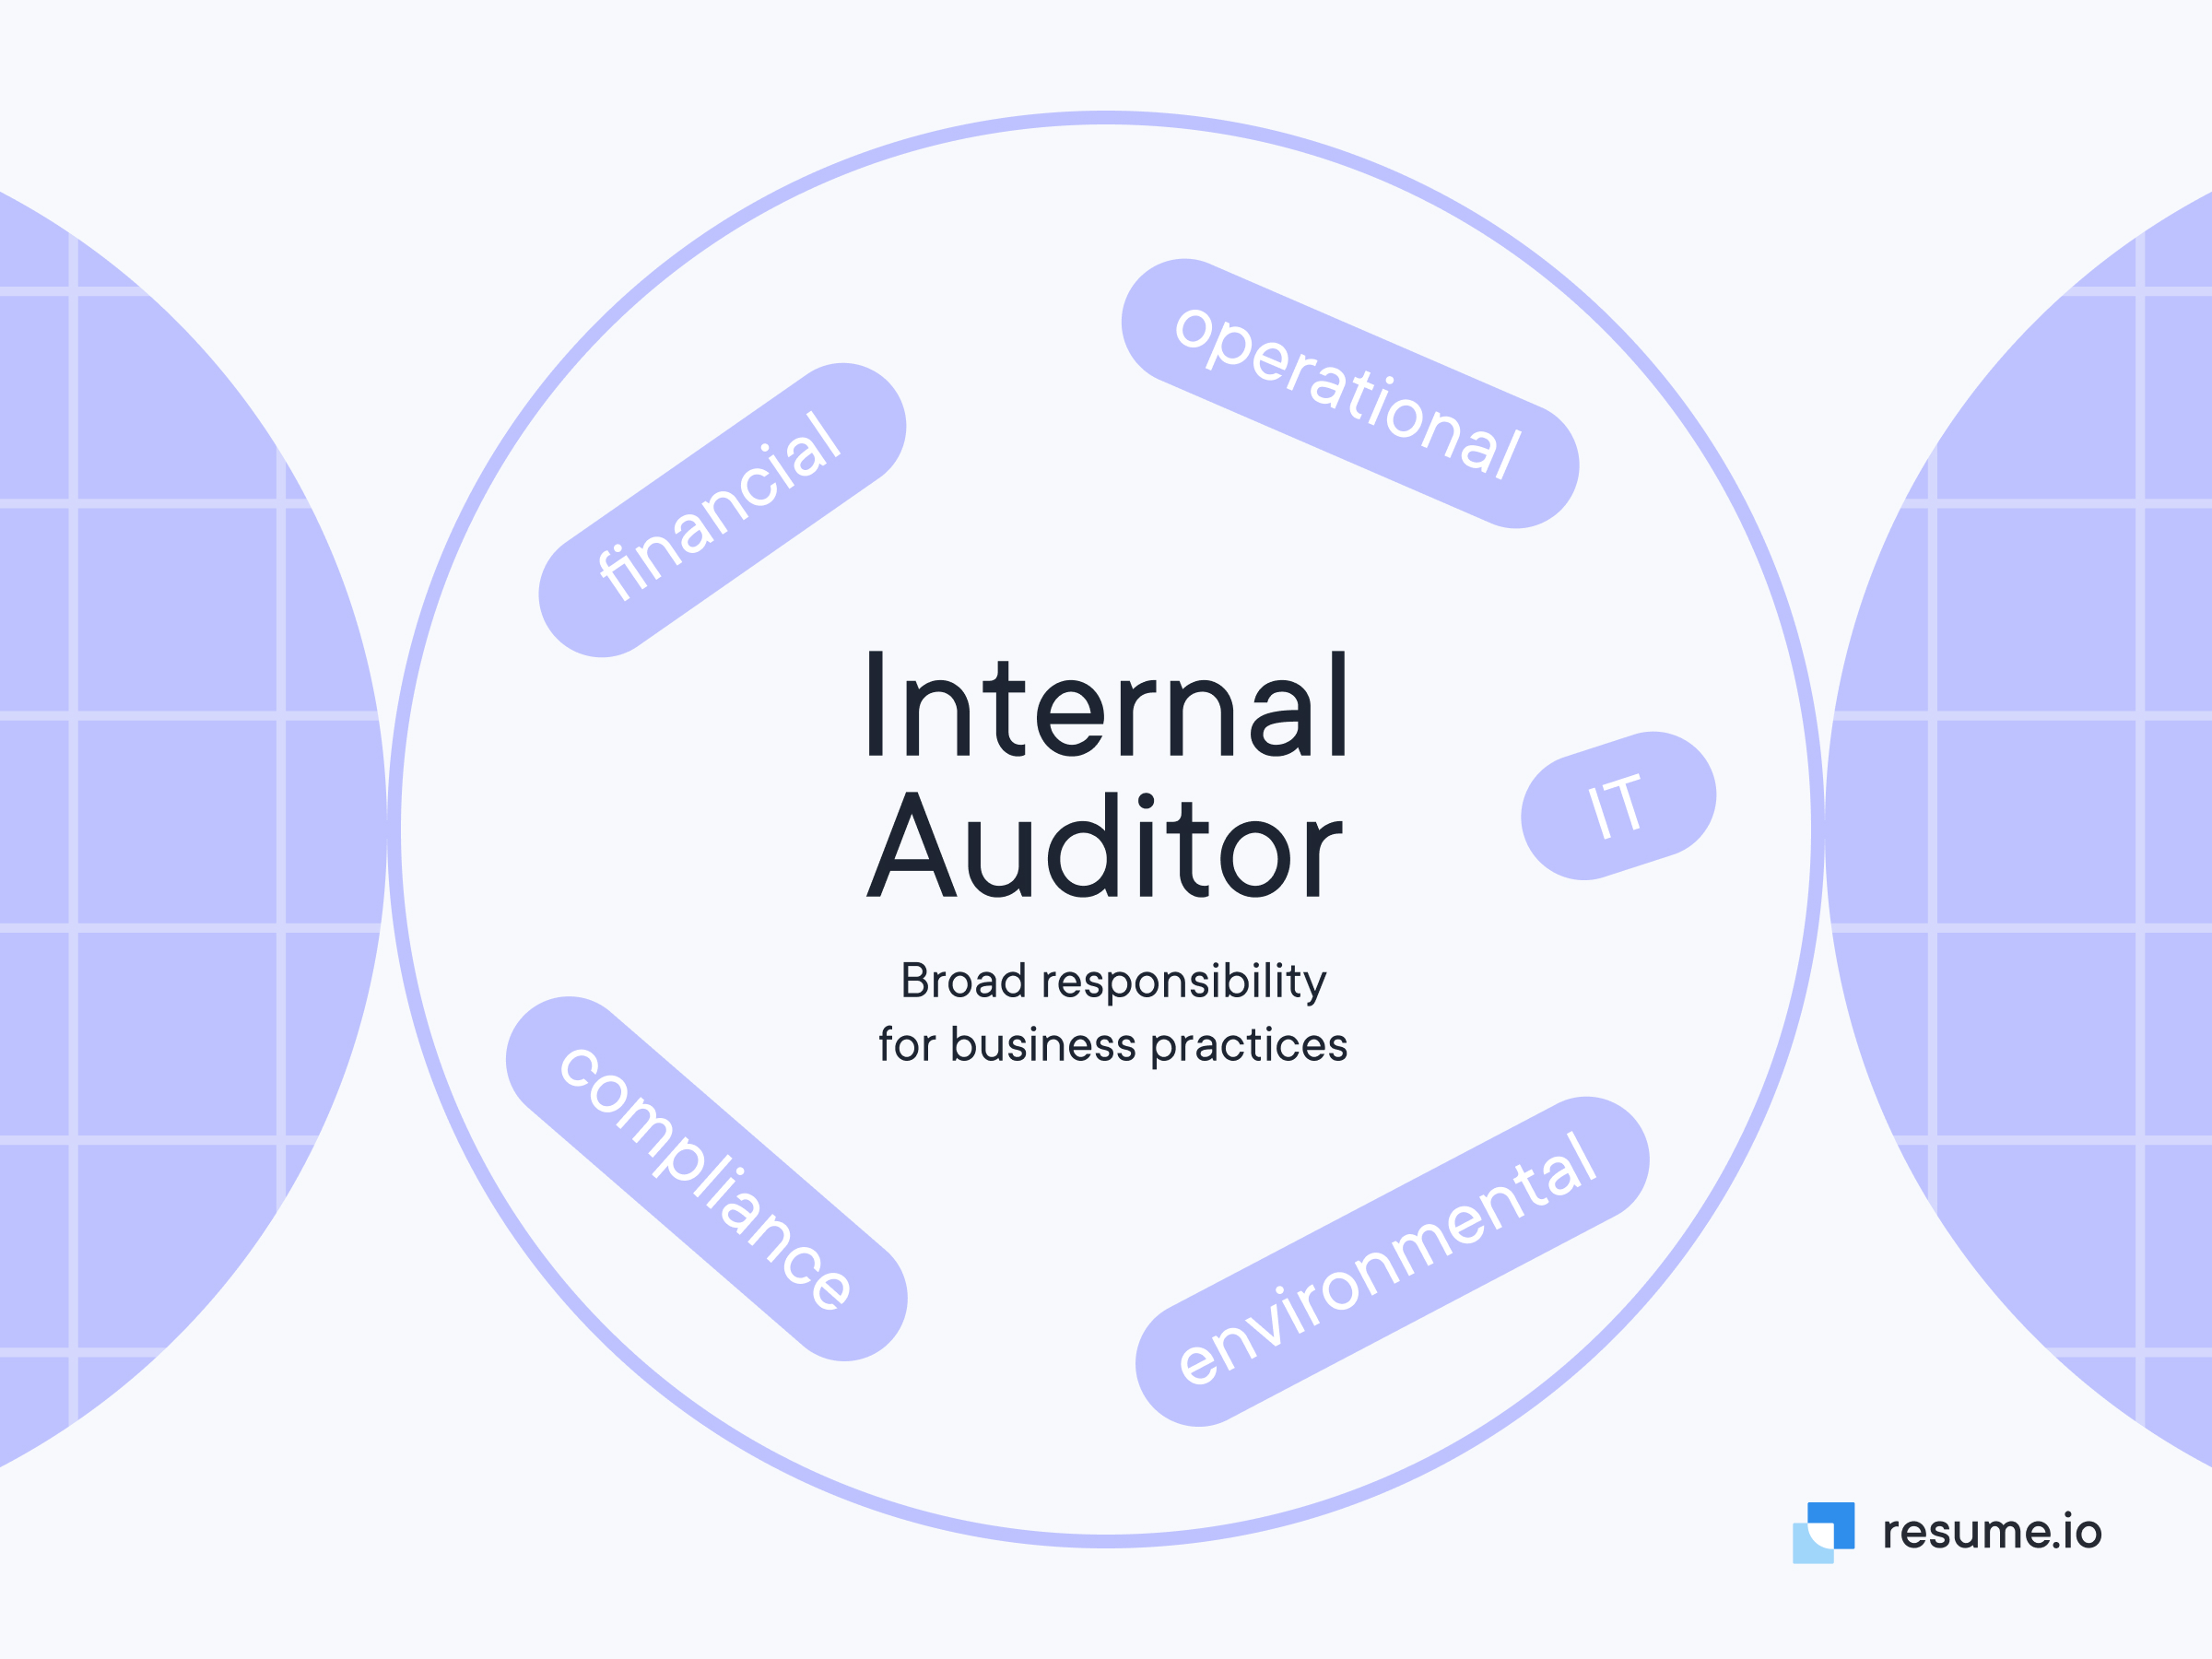 Some of the responsibility's of an Internal auditor are environmental, compliance, financial and operational 